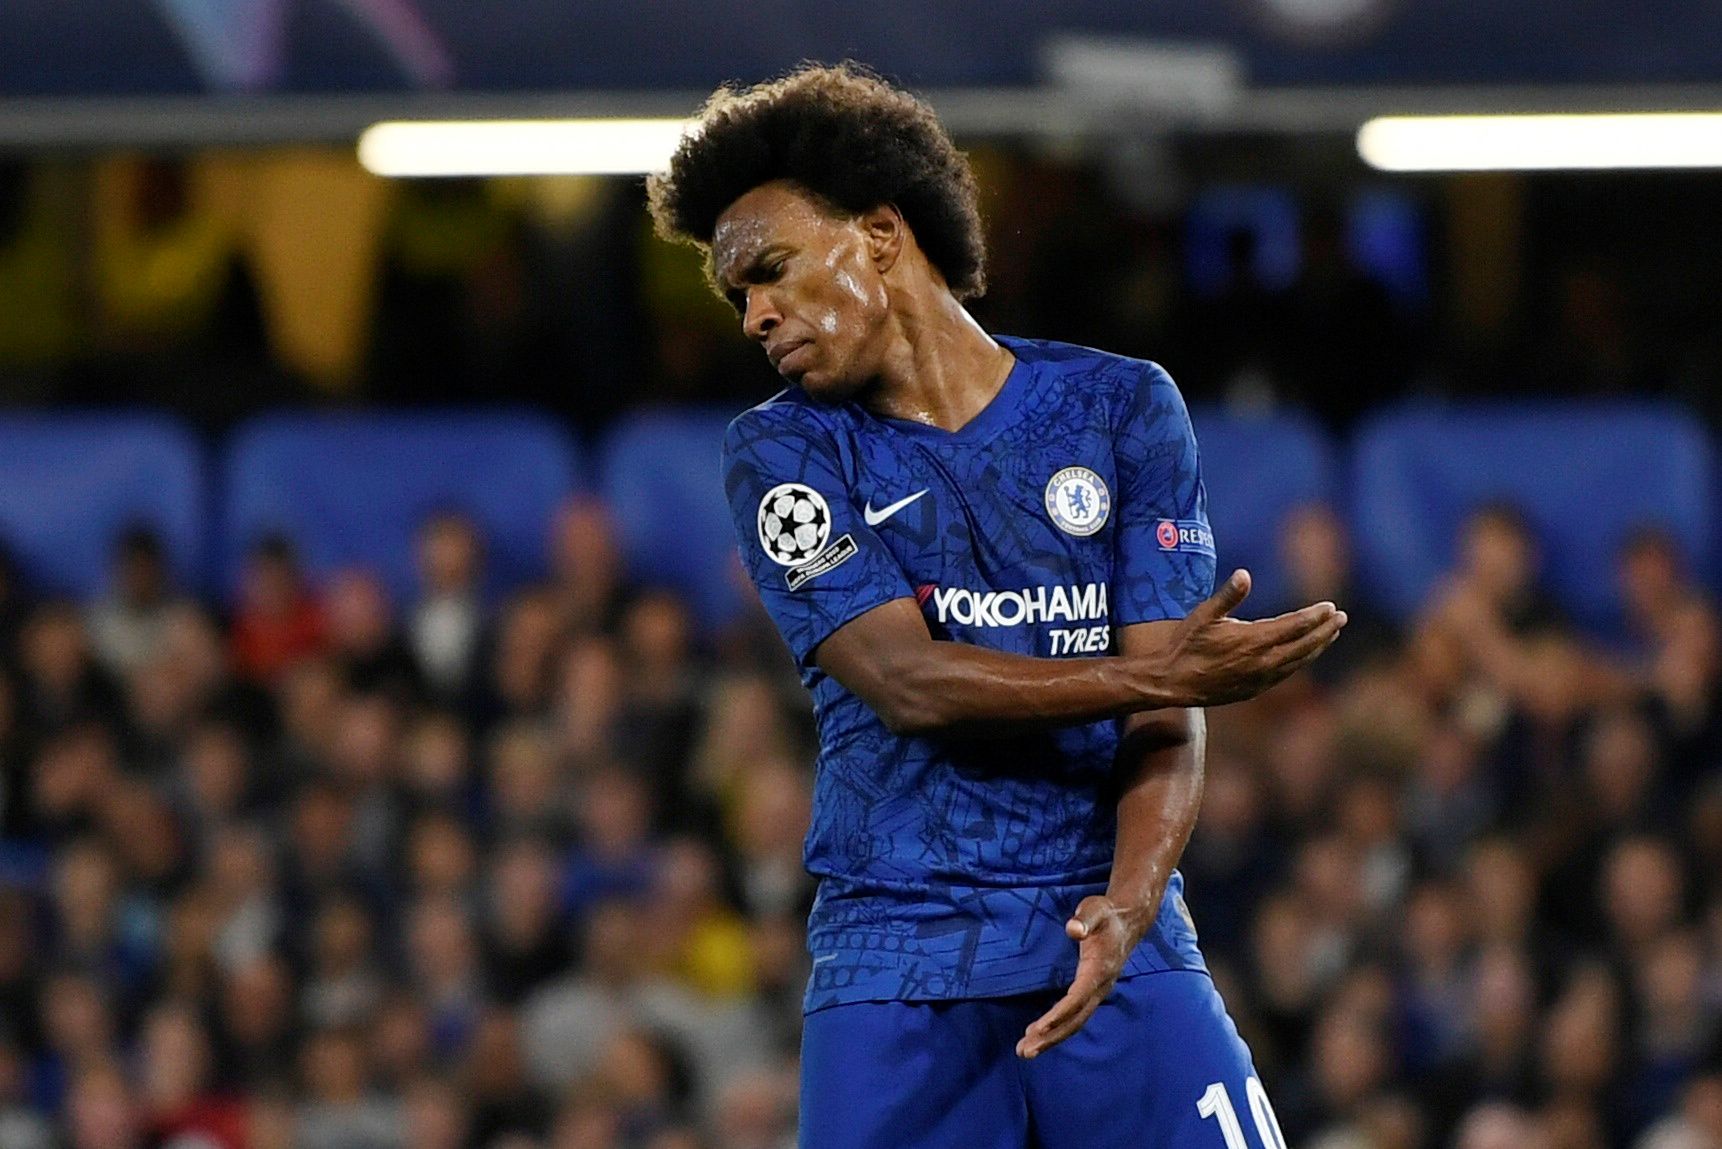 Soccer Football - Champions League - Group H - Chelsea v Valencia - Stamford Bridge, London, Britain - September 17, 2019  Chelsea's Willian reacts after a missed chance  Action Images via Reuters/Tony O'Brien